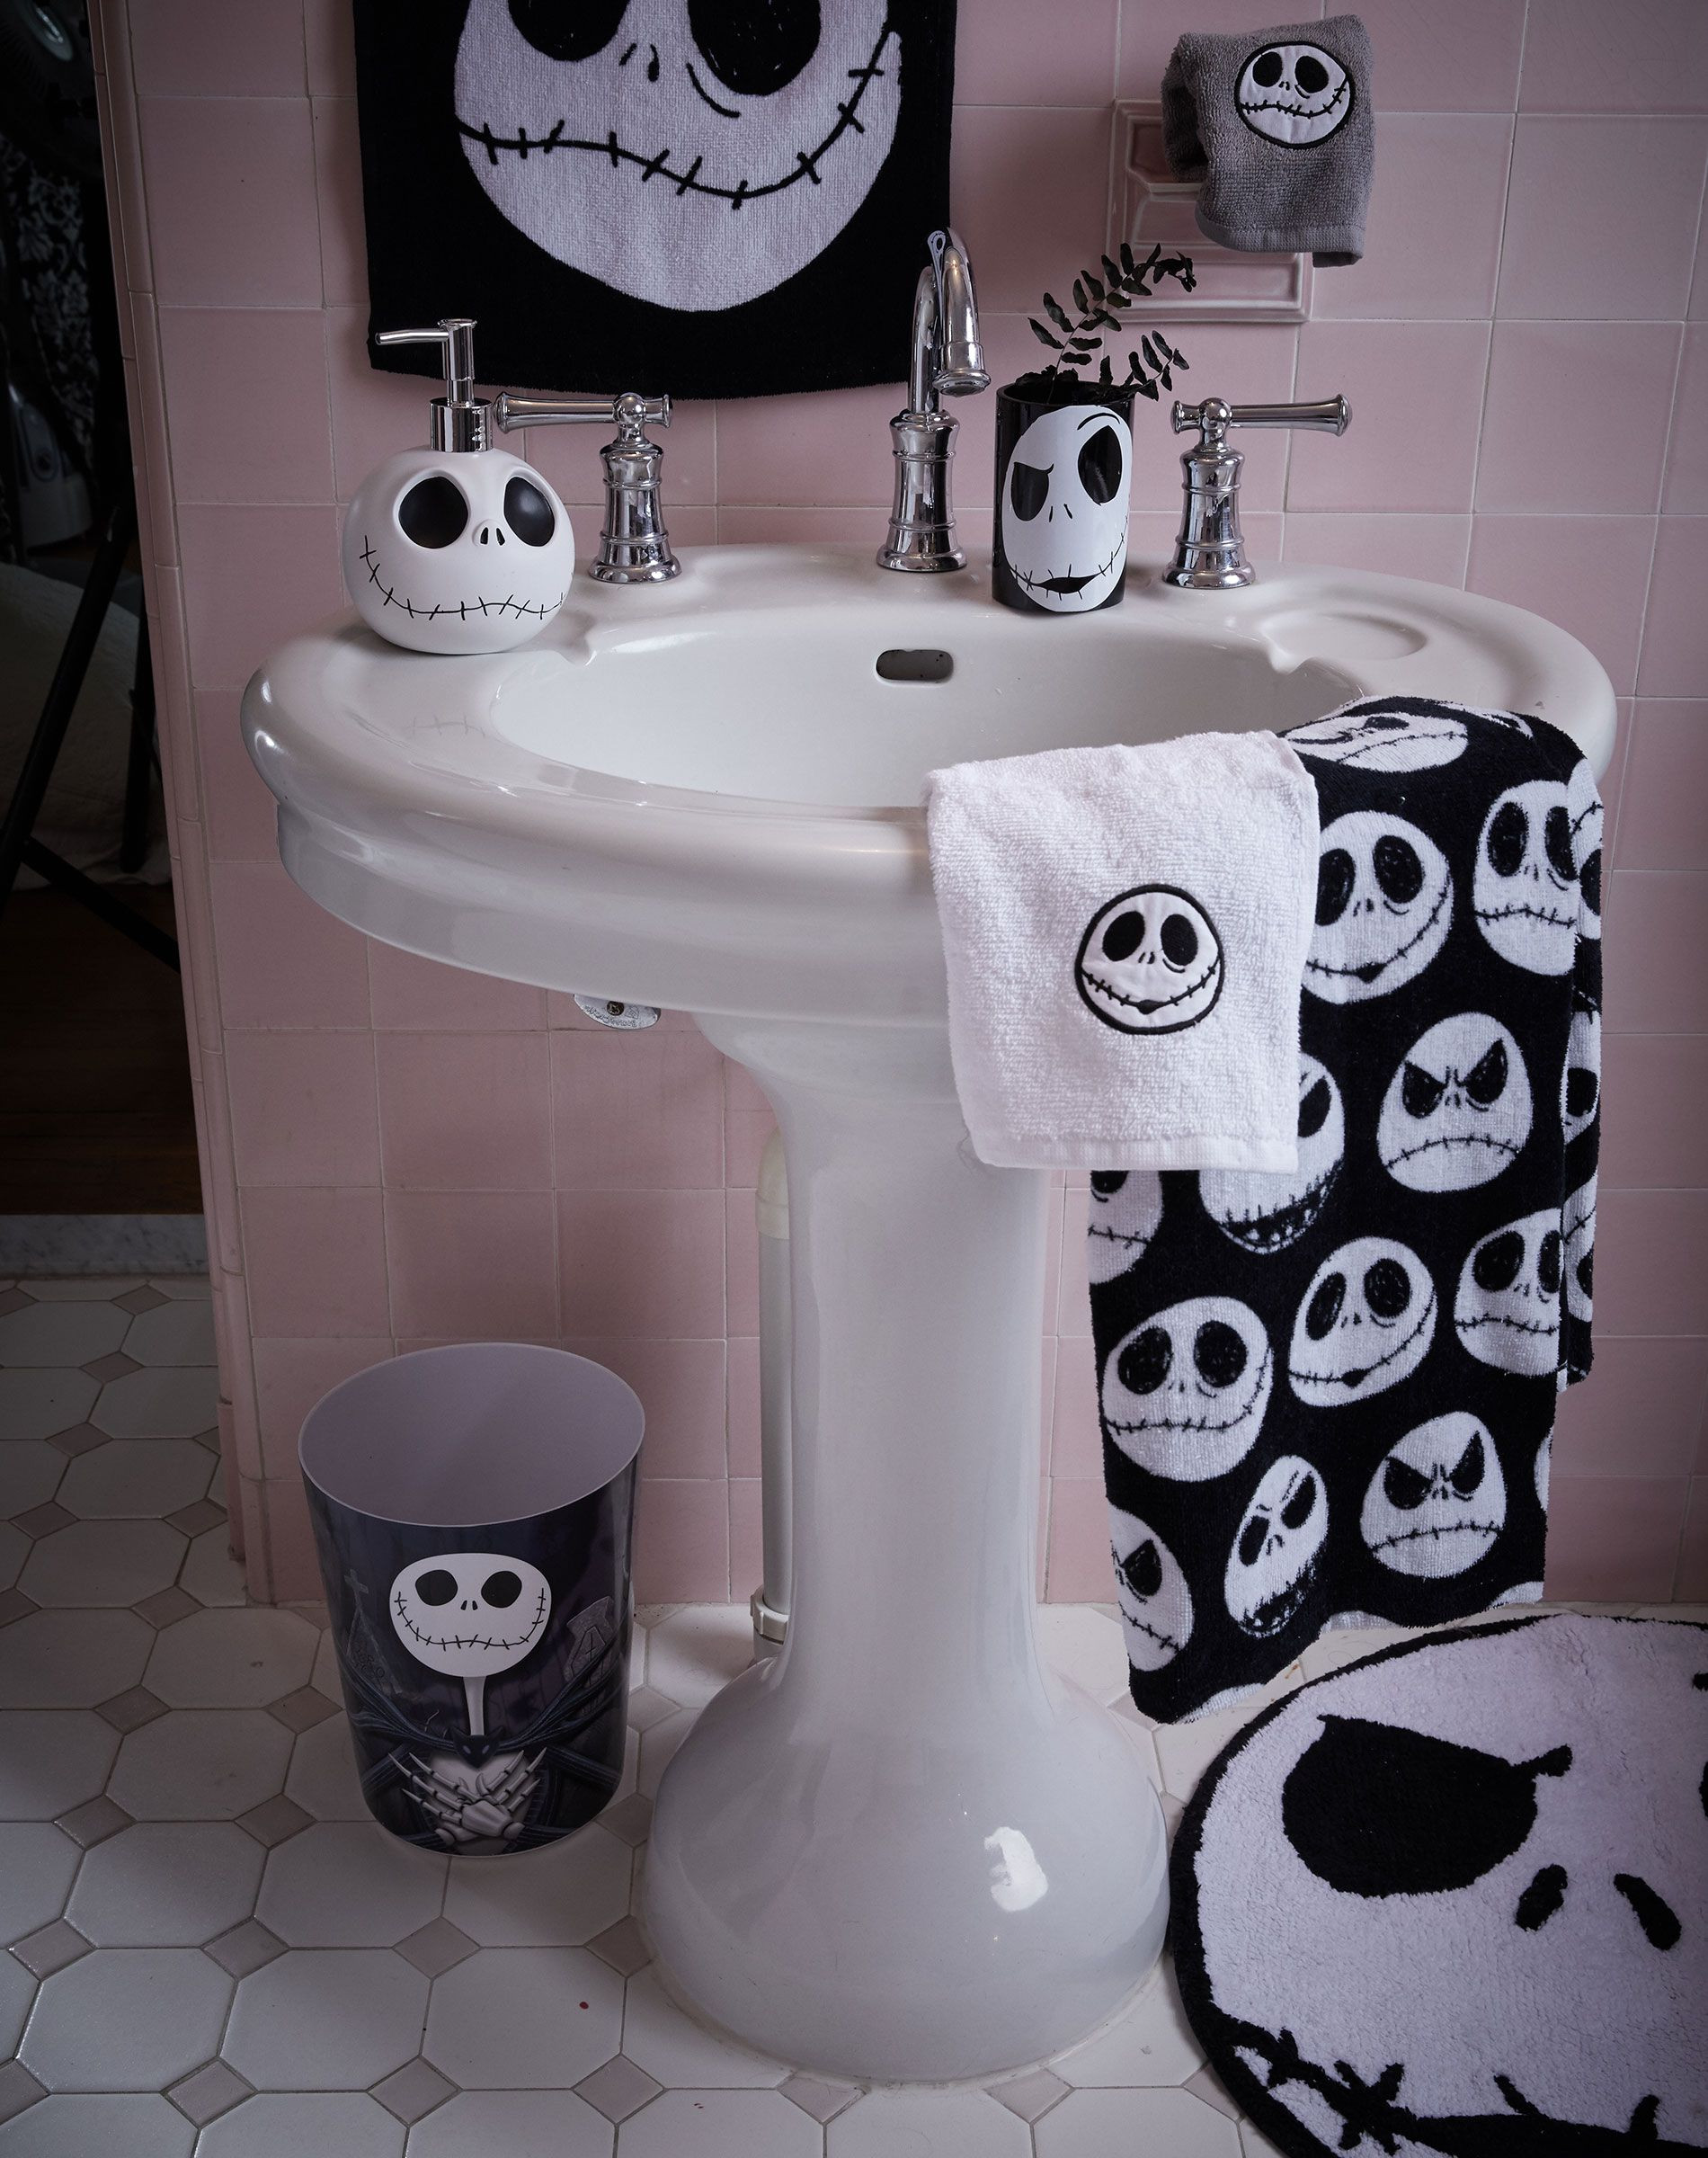 Nightmare Before Christmas Bathroom Stuff
 This is Halloween Fill your bathroom with the Pumpkin